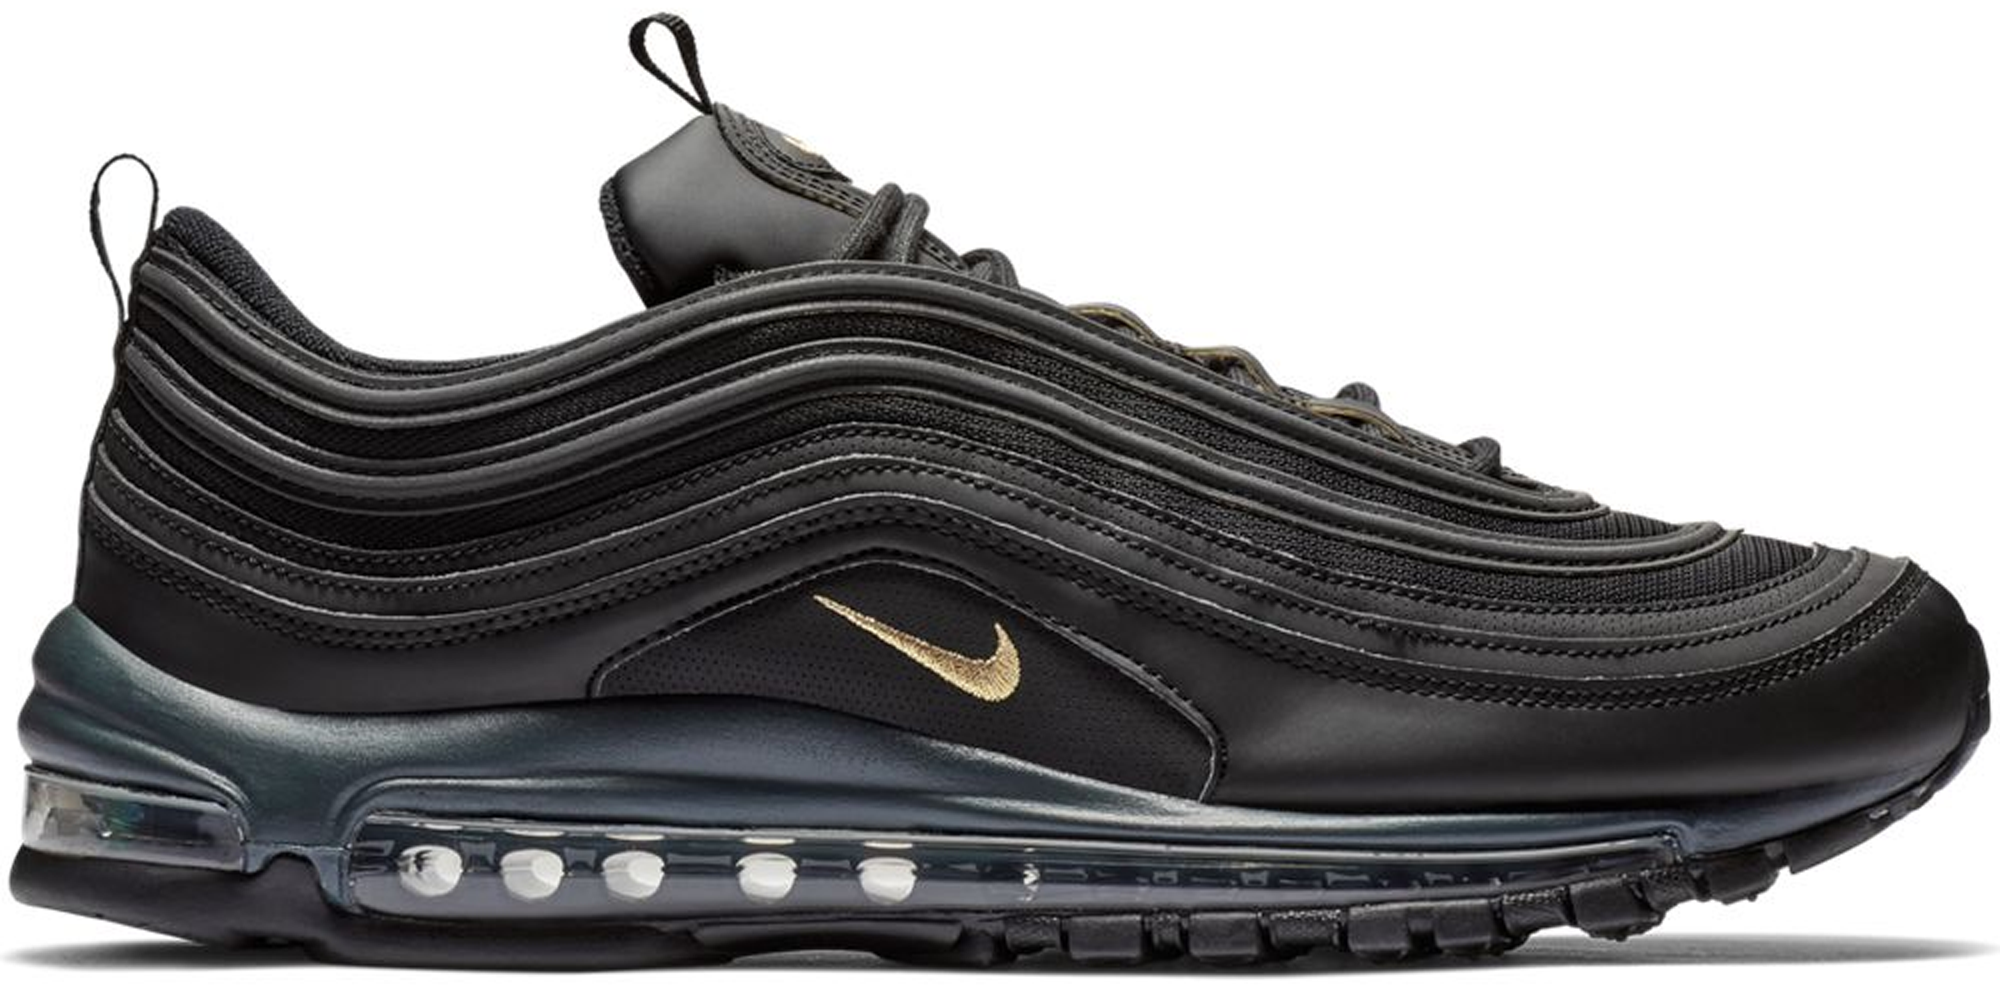 Nike Air Max 97 Leather Black Gold 